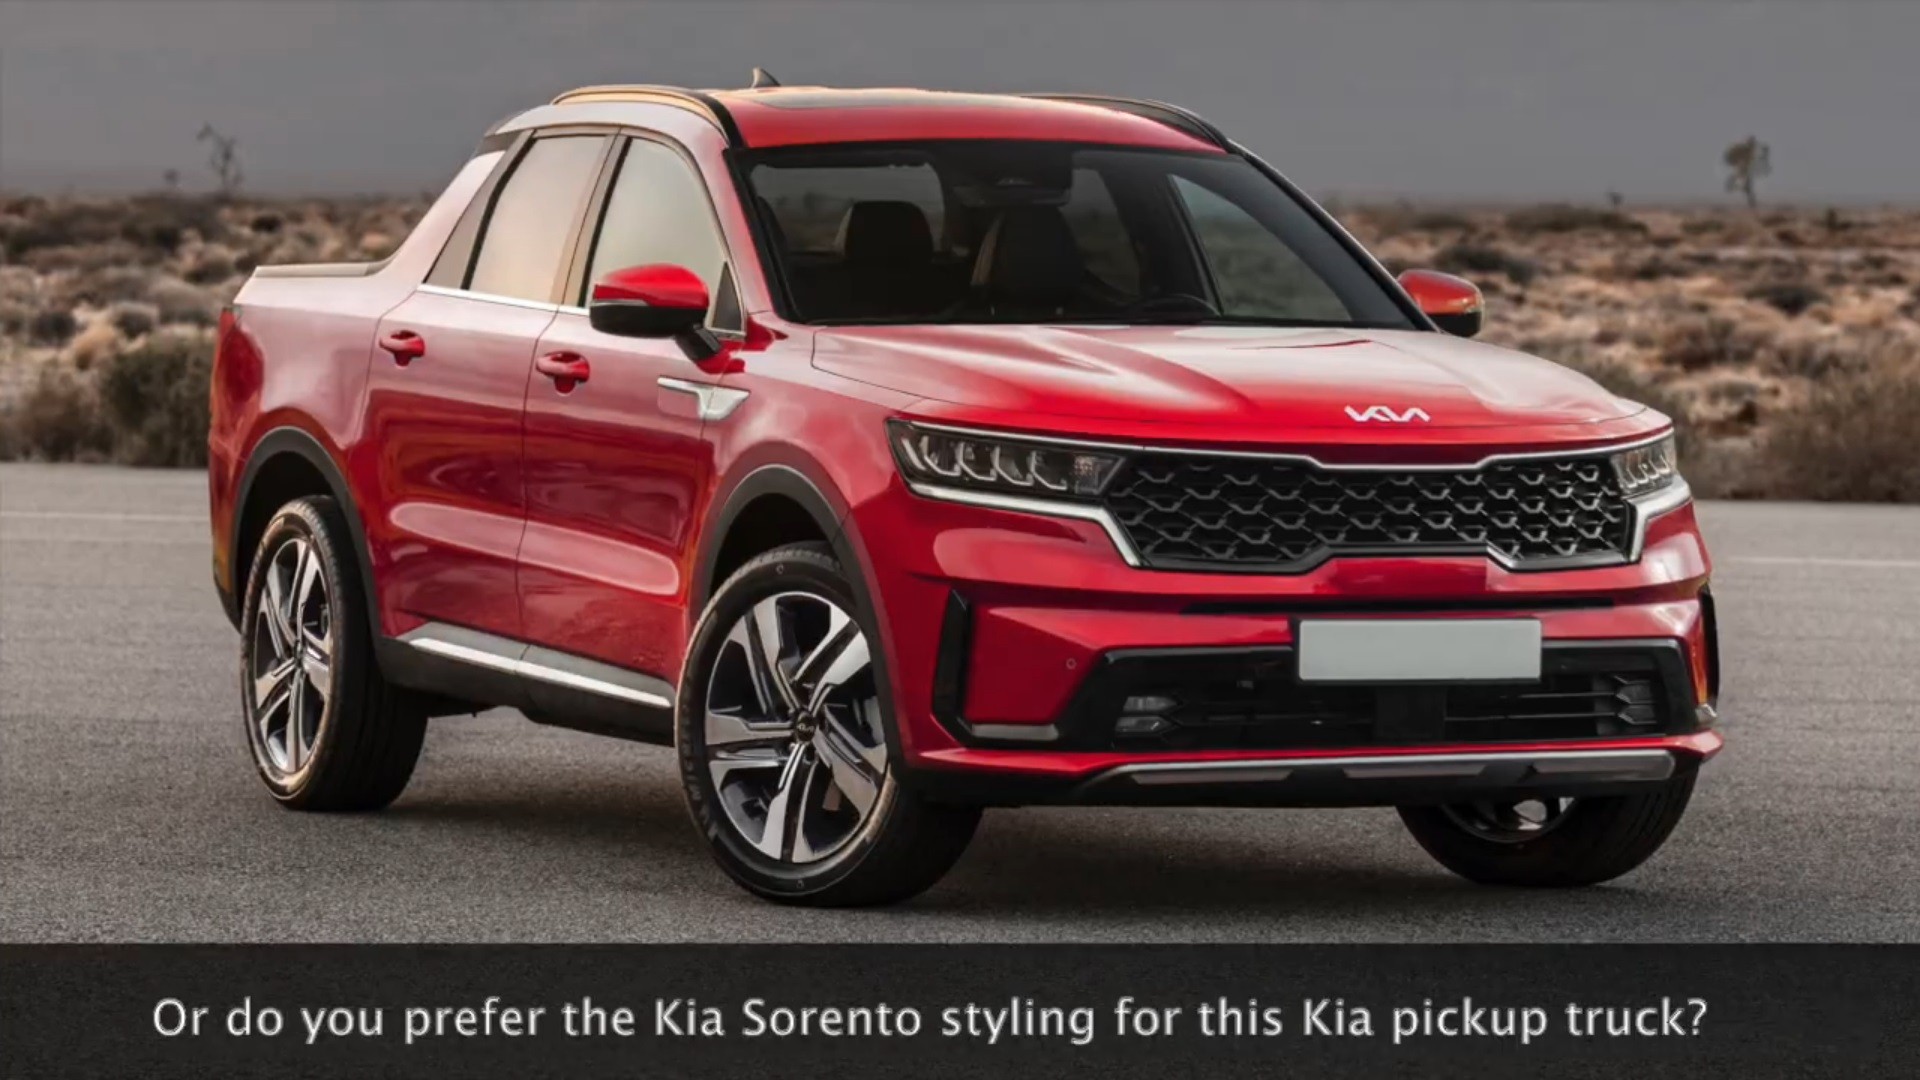 2023 Kia Sportage Pickup Truck Rendering Imagines a Sibling for the